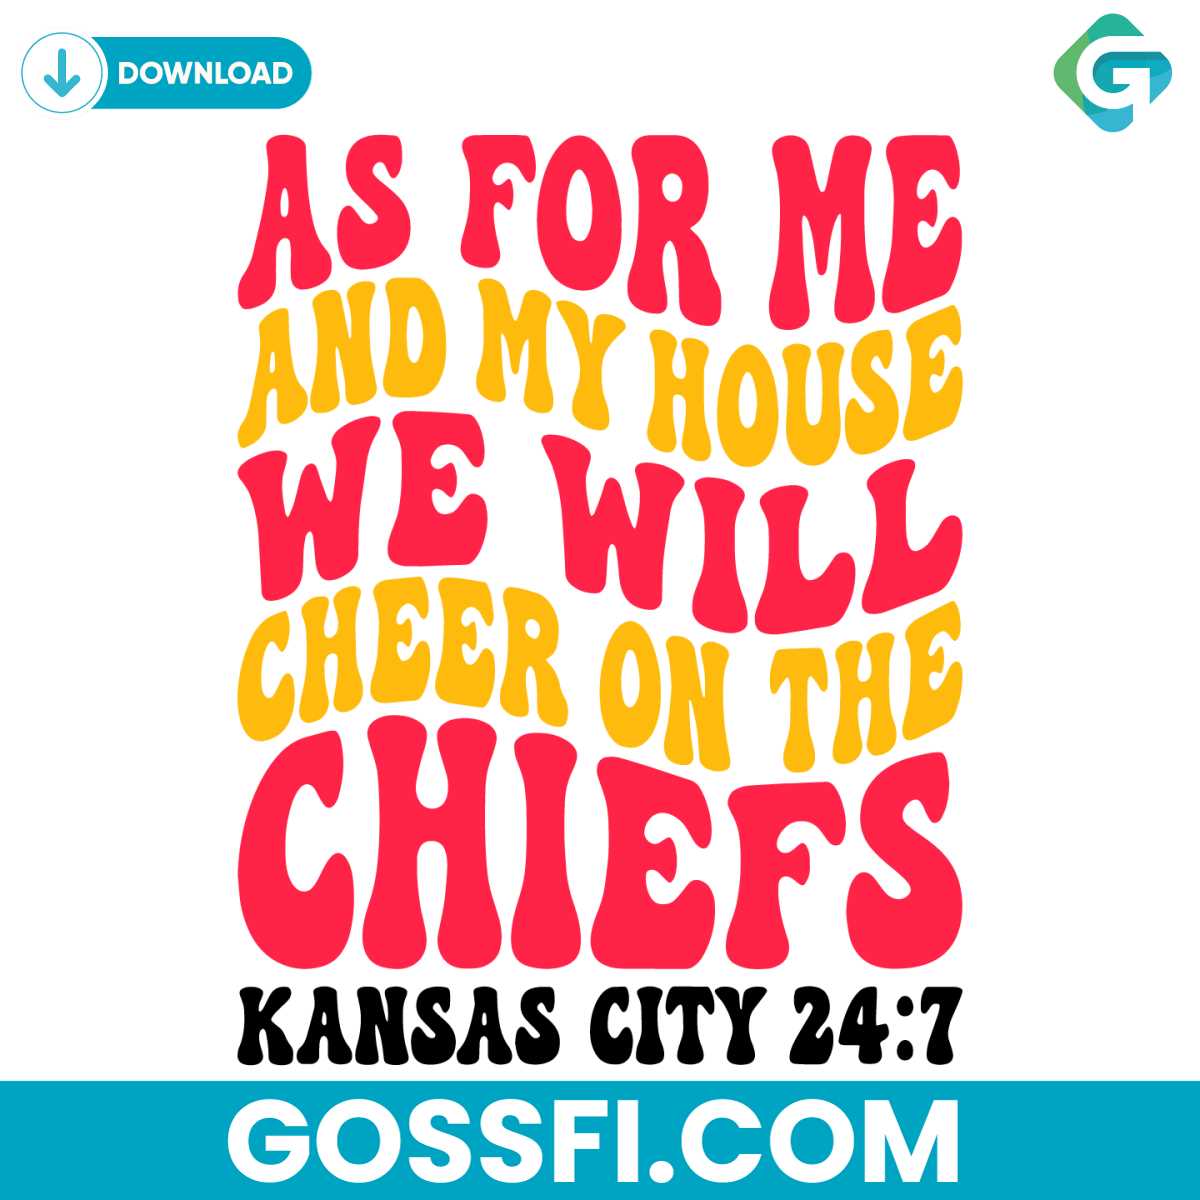 as-for-me-and-my-house-we-will-cheer-on-the-chiefs-kansas-city-svg